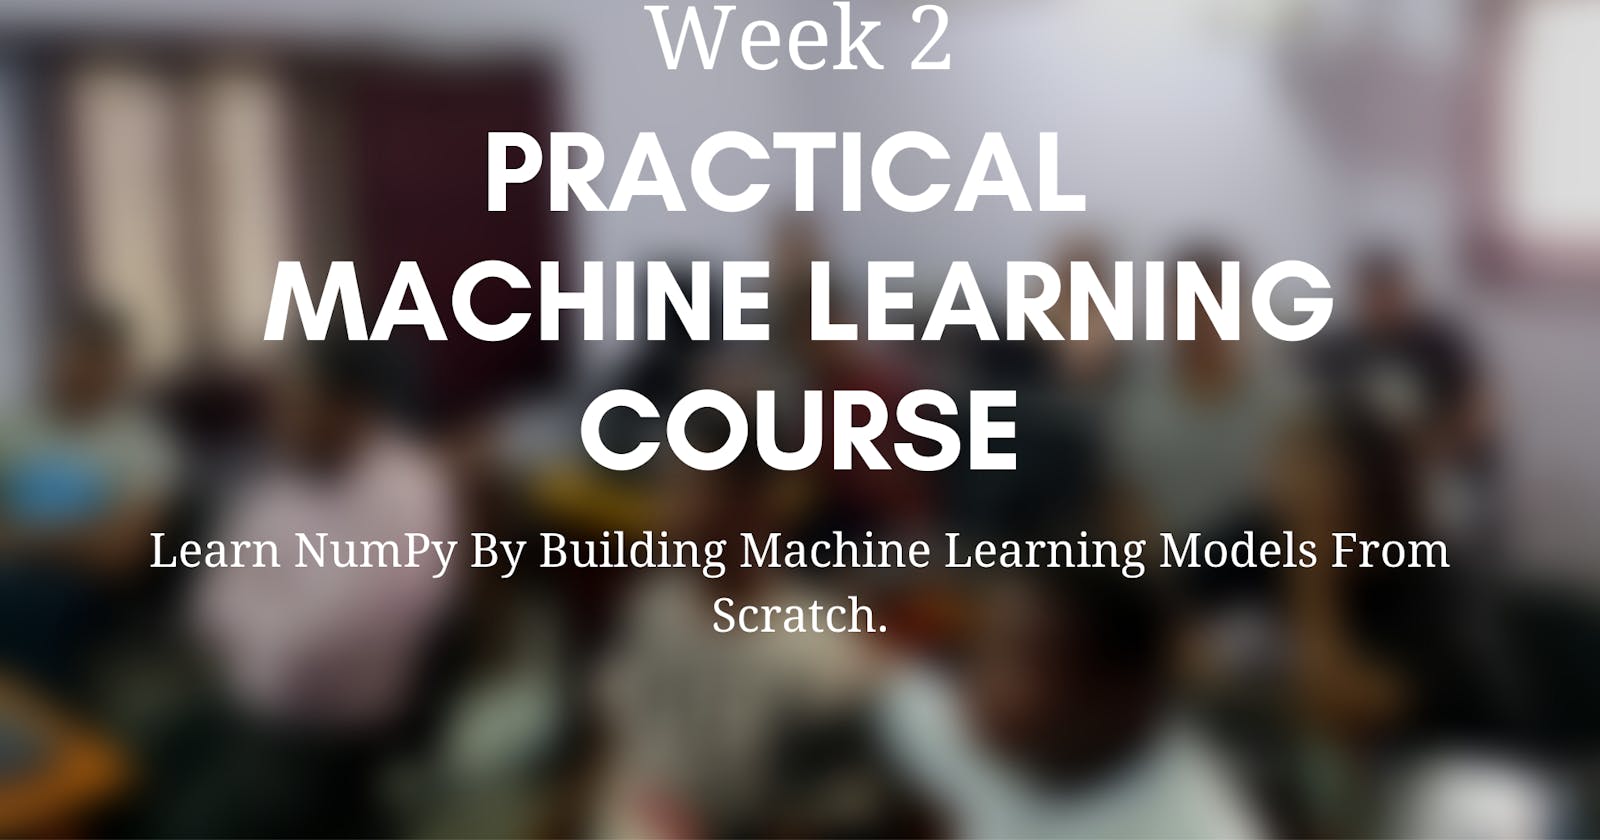 Practical Machine Learning Course Week 2 Highlights; Learn NumPy By Building Machine Learning Models From Scratch.